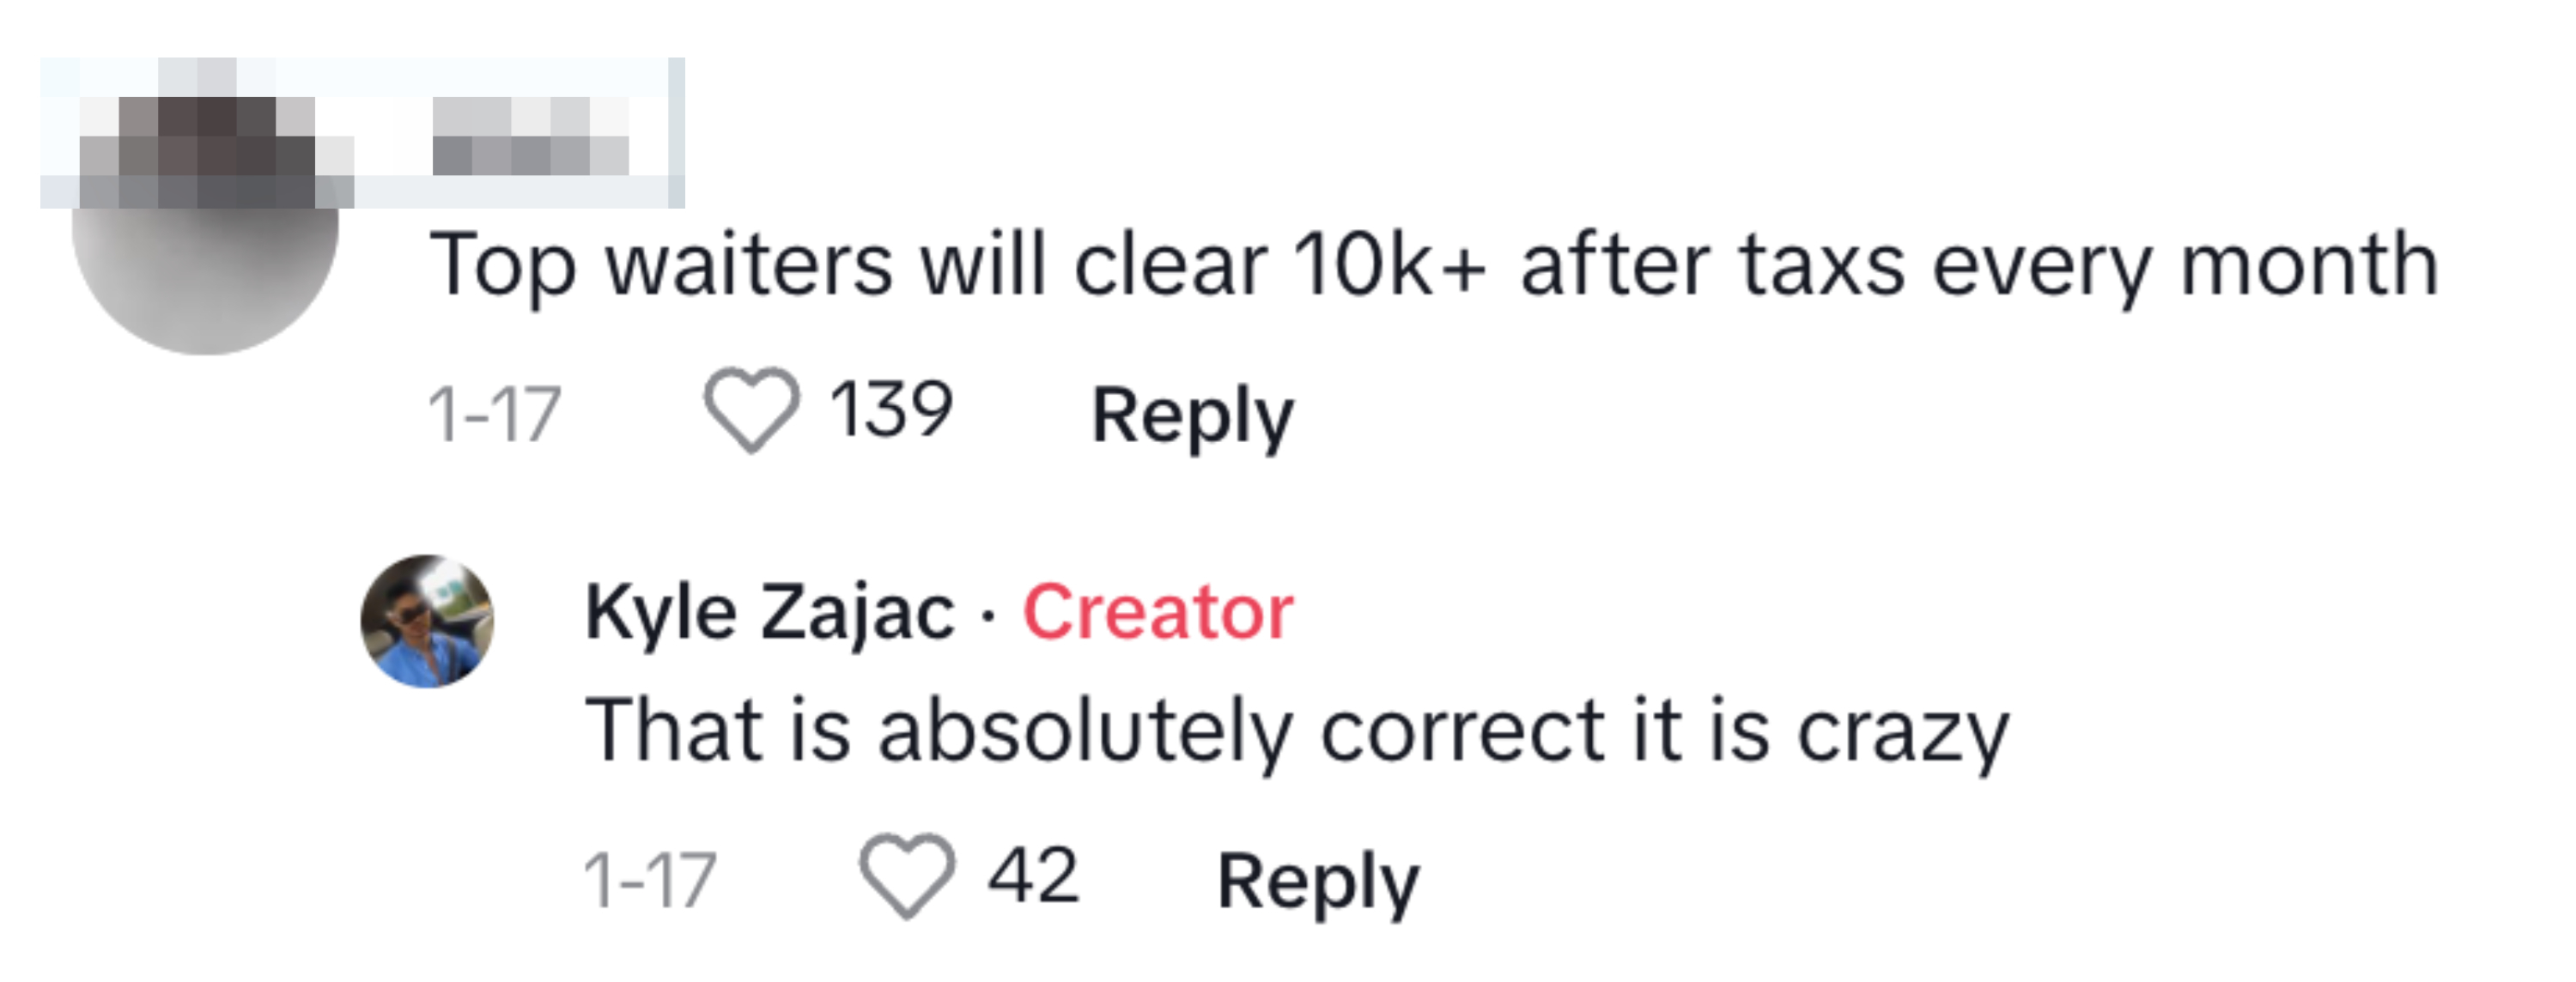 Comment exchange about top waiters earning over 10k a month after taxes